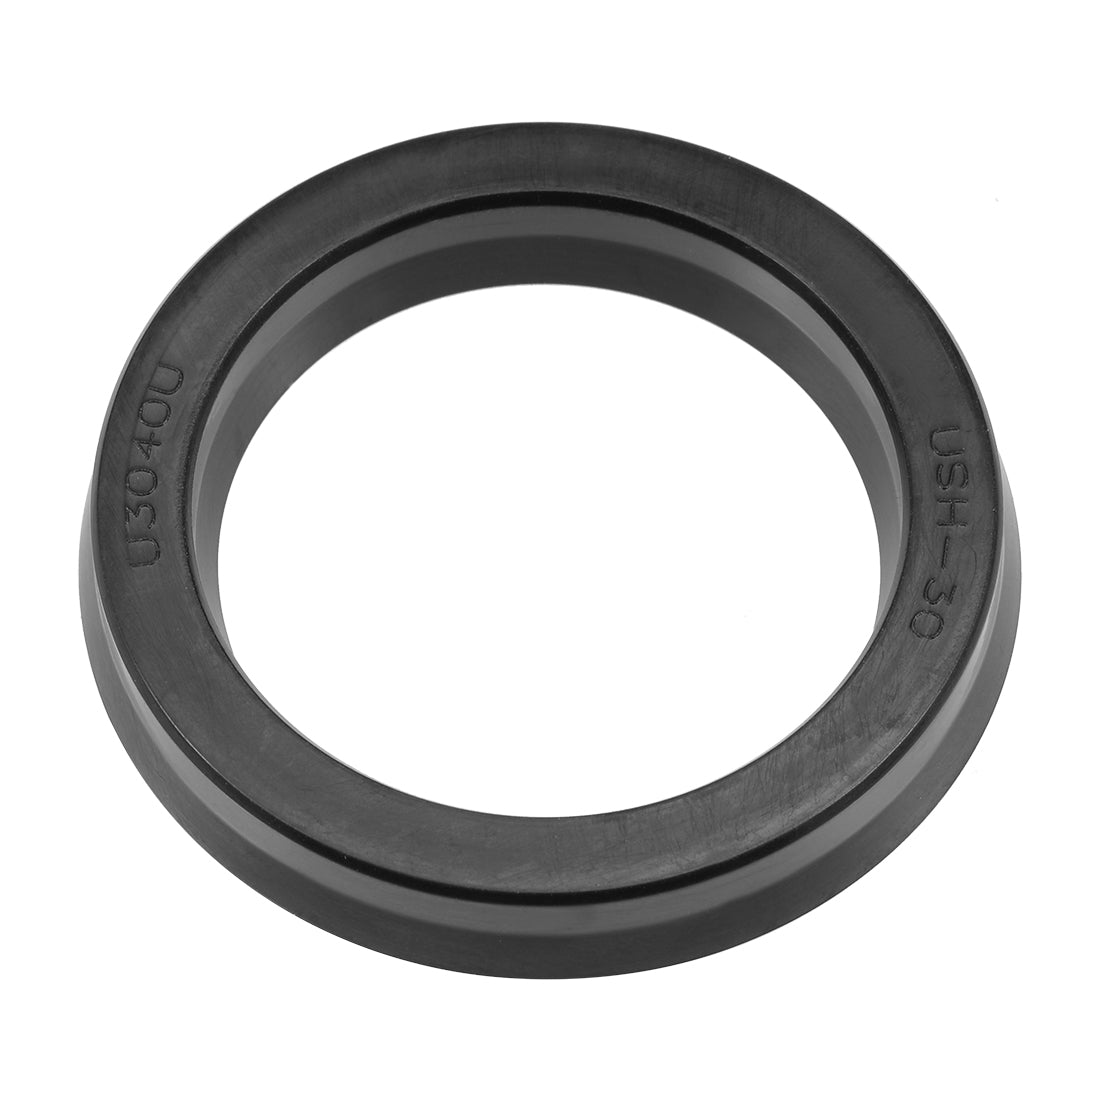 uxcell Uxcell Hydraulic Seal, Piston Shaft USH Oil Sealing O-Ring, 30mm x 39mm x 6mm